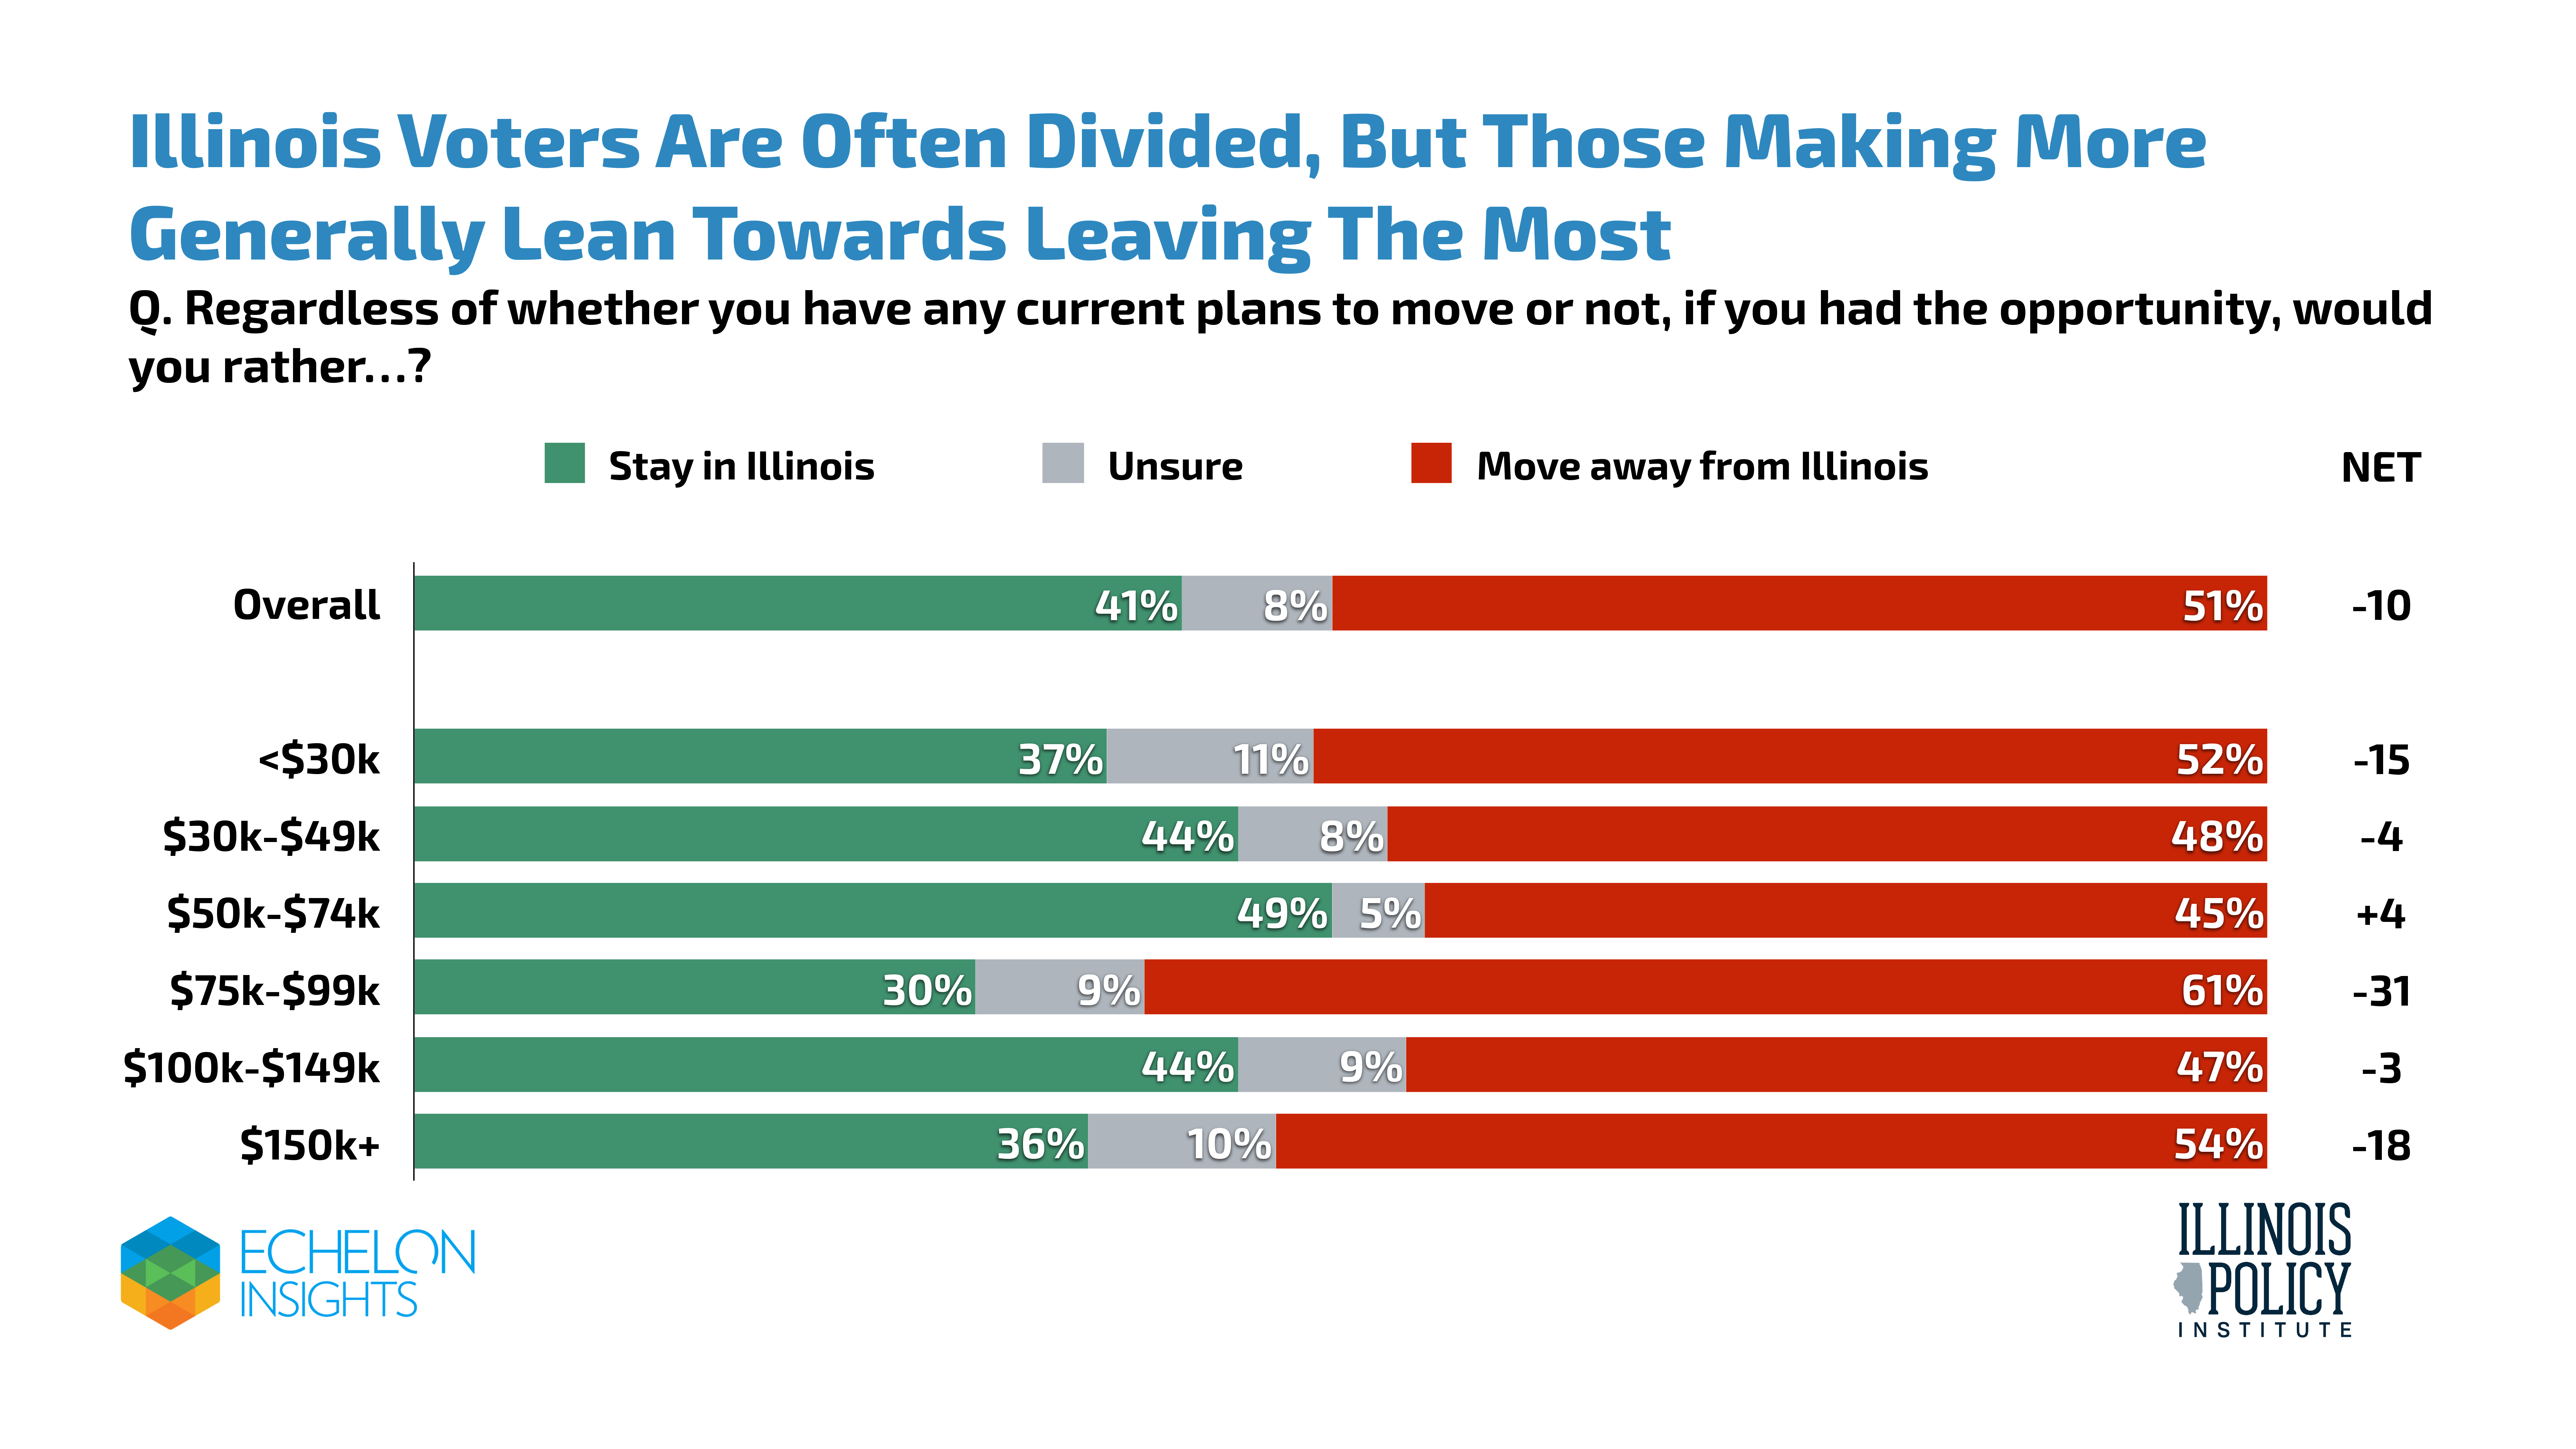 Illinois Voters Are Often Divided, But Those Making More Generally Lean Towards Leaving The Most